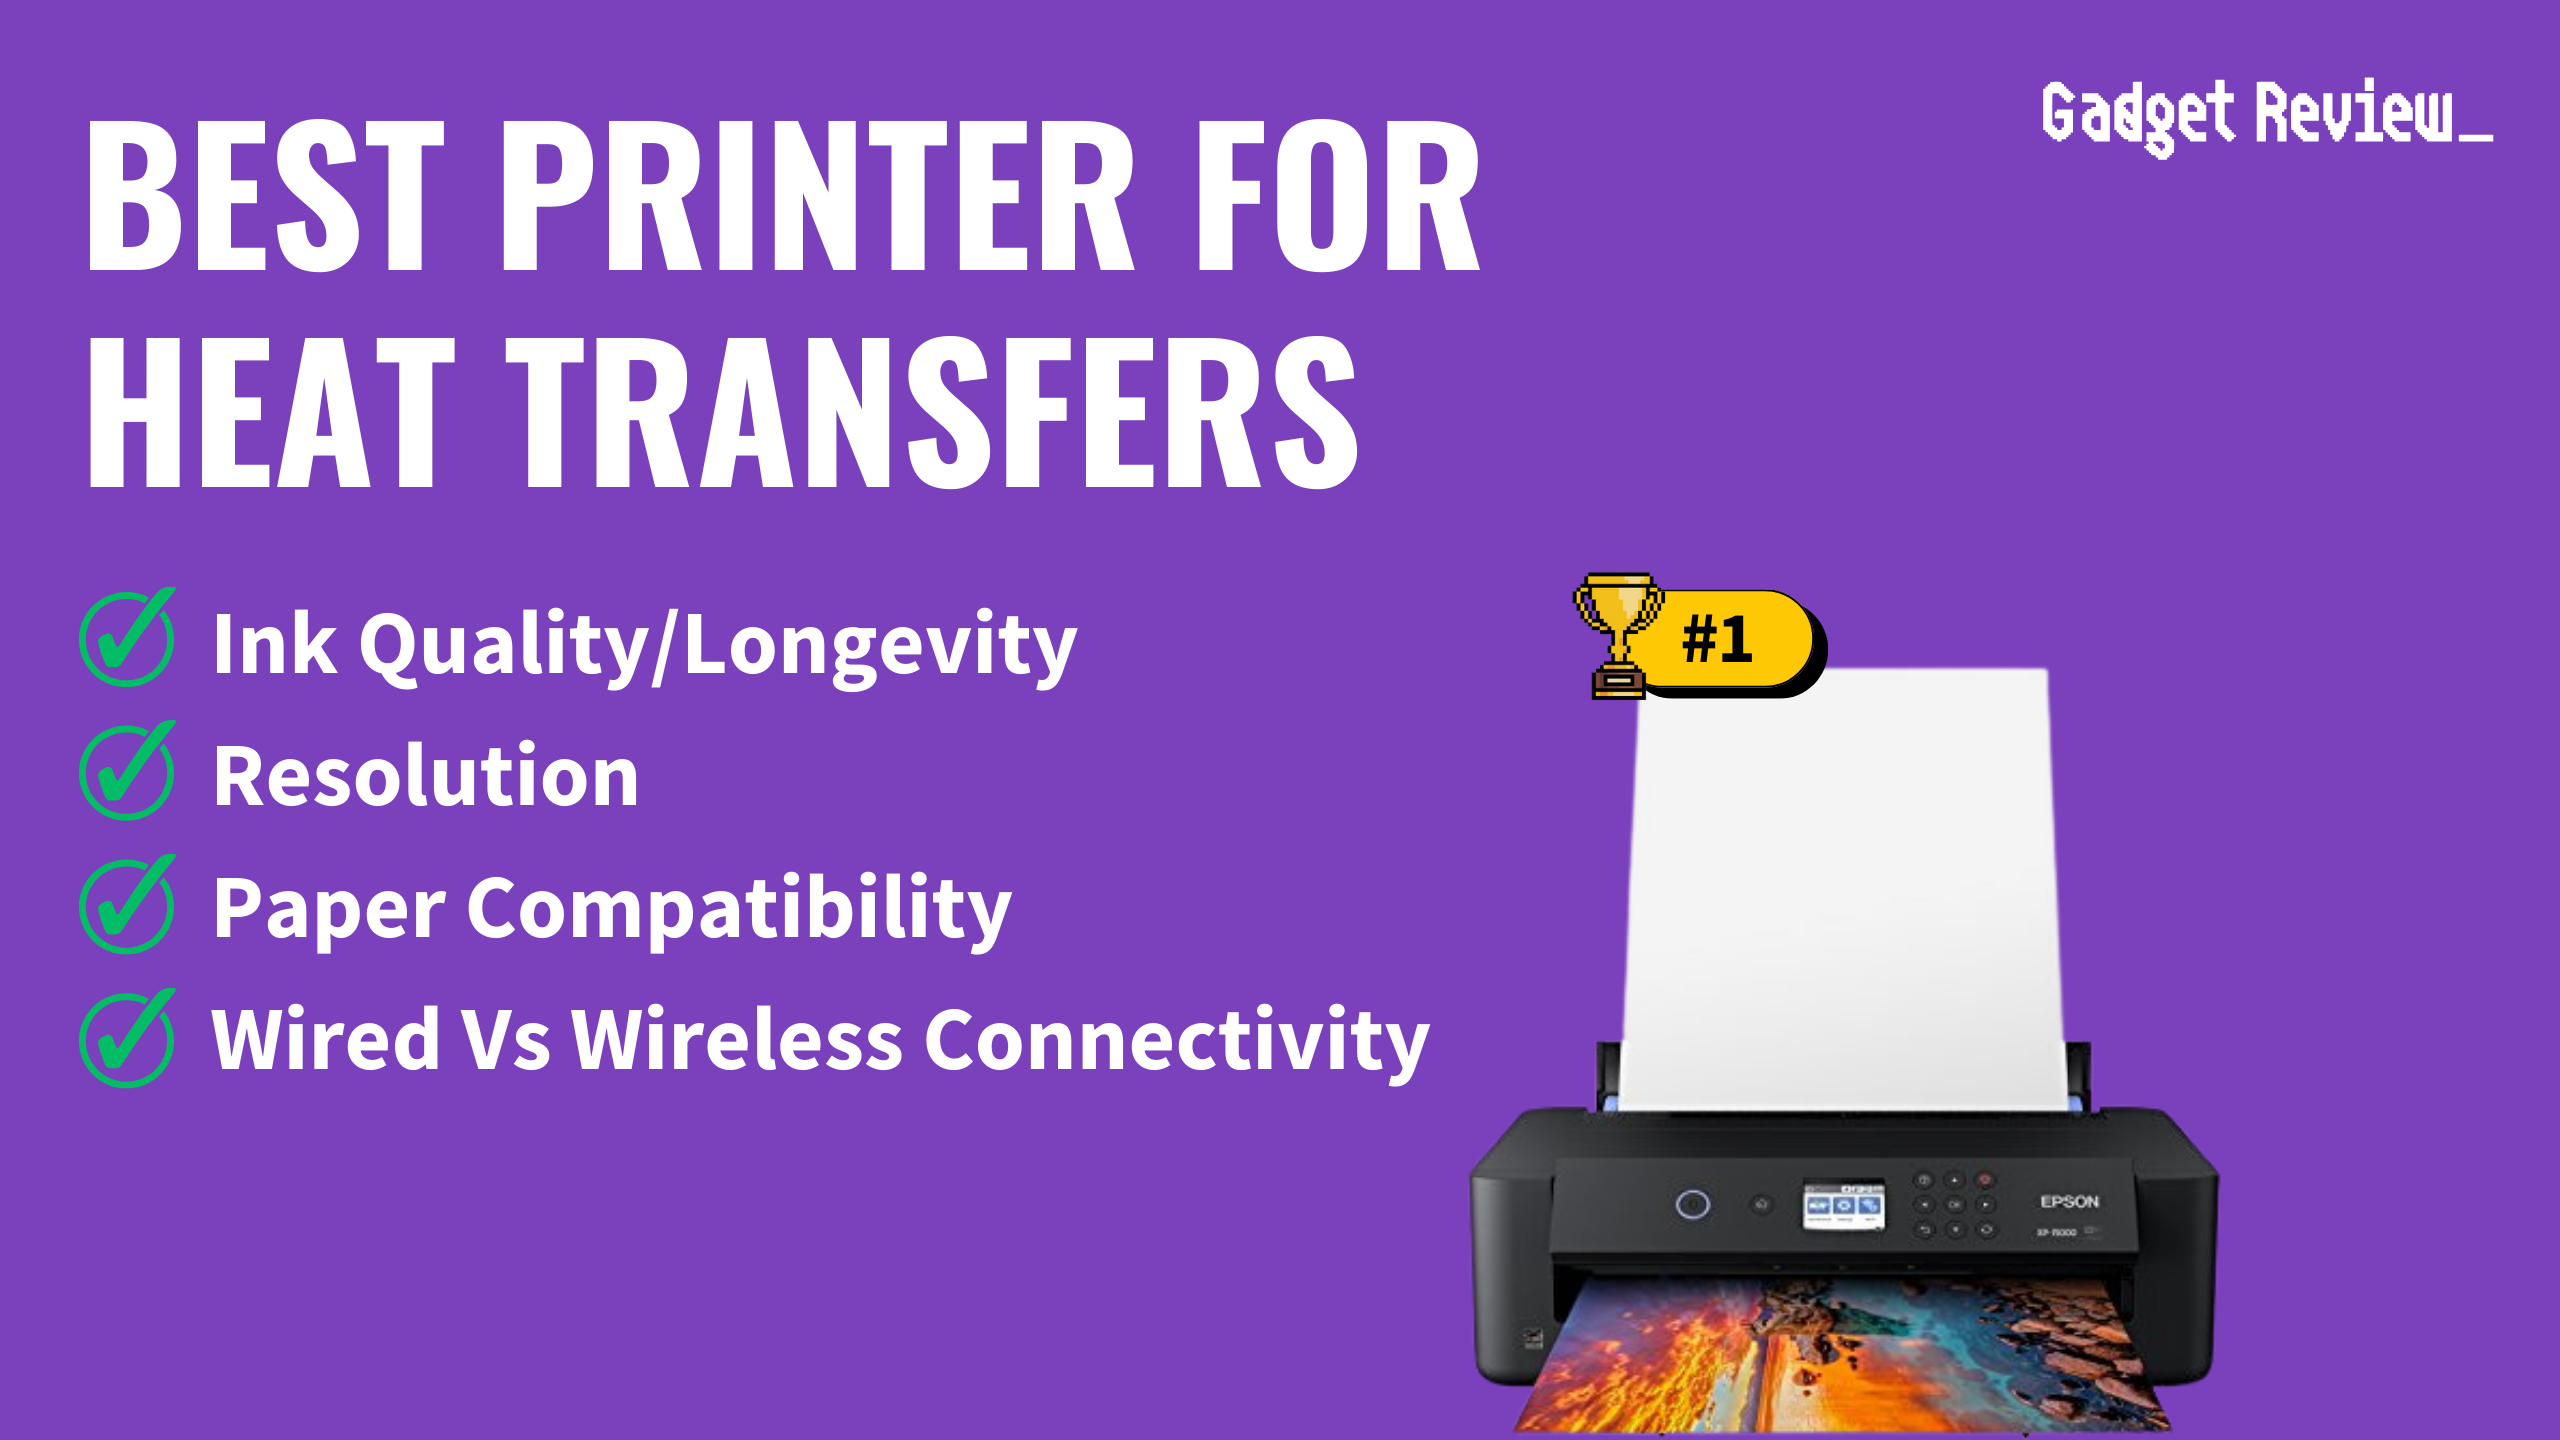 best printer heat transfers featured image that shows the top three best printer models